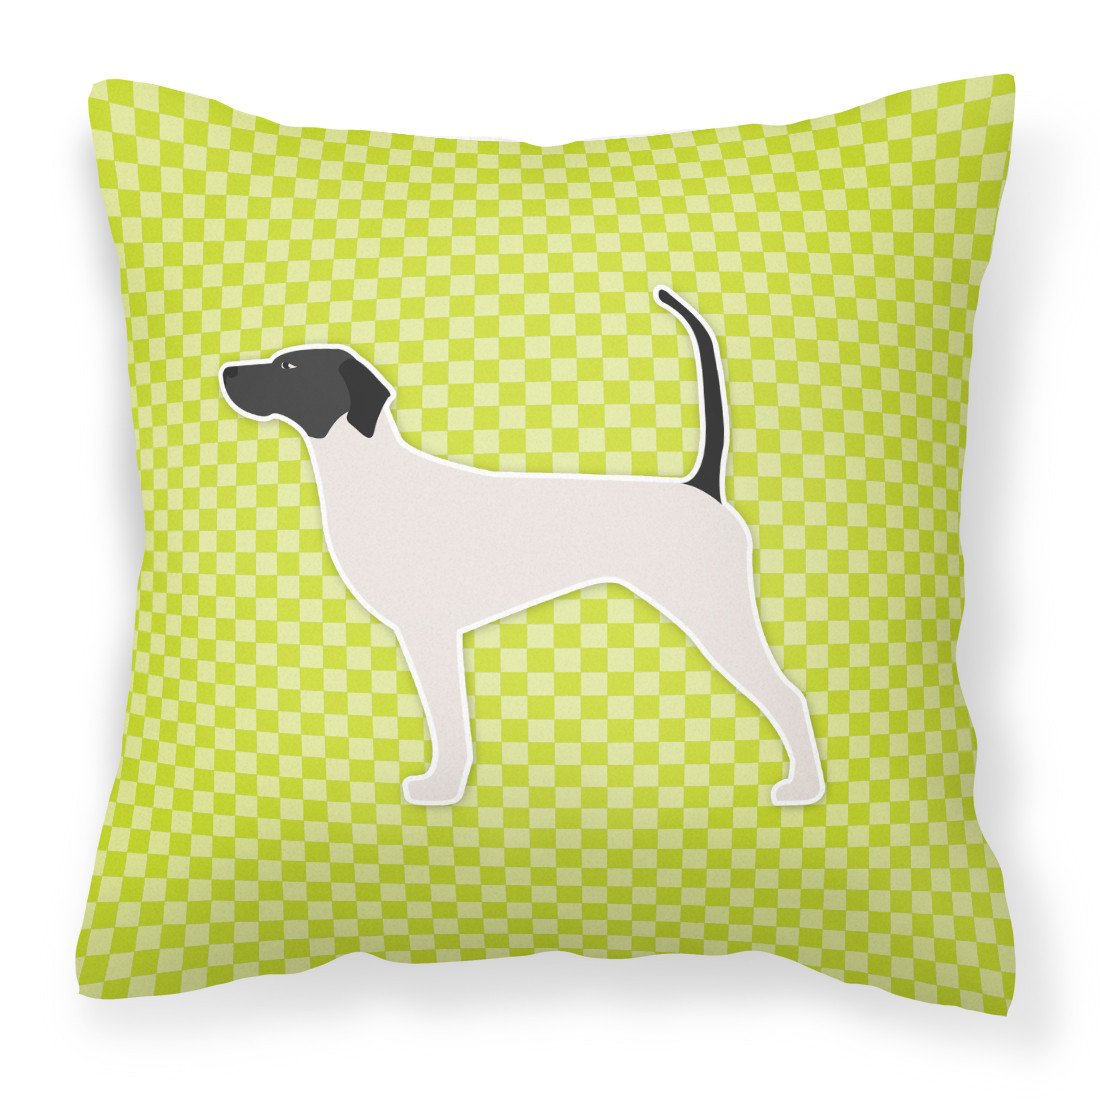 English Pointer Checkerboard Green Fabric Decorative Pillow BB3795PW1818 by Caroline's Treasures